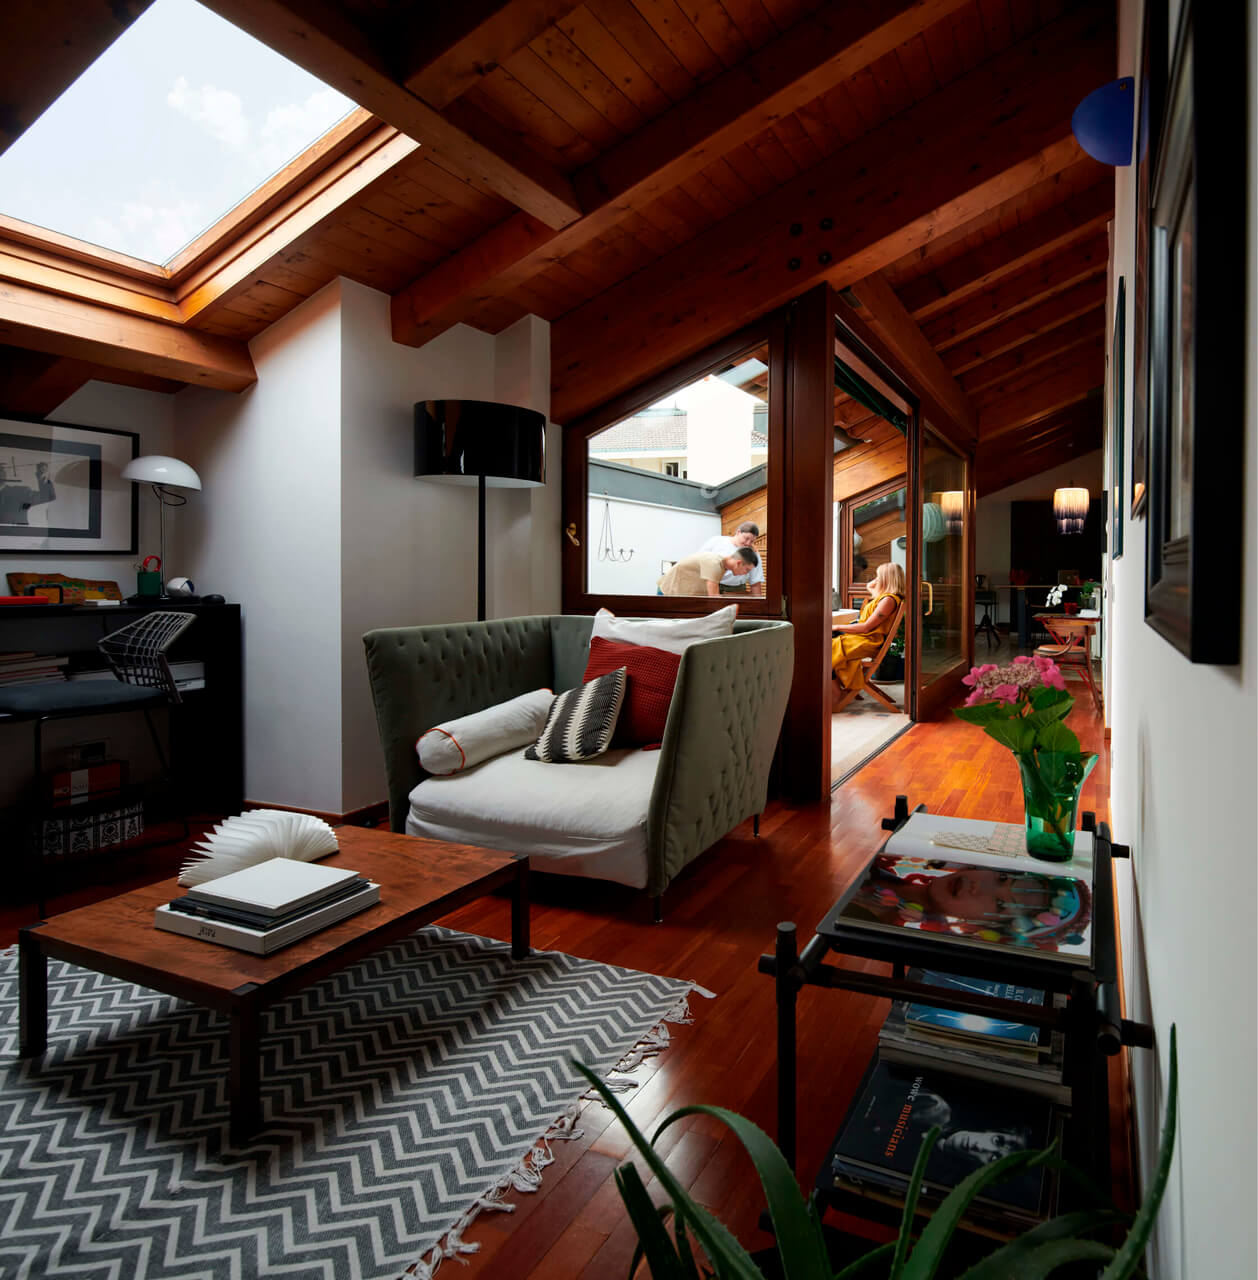 Living room with a roof window